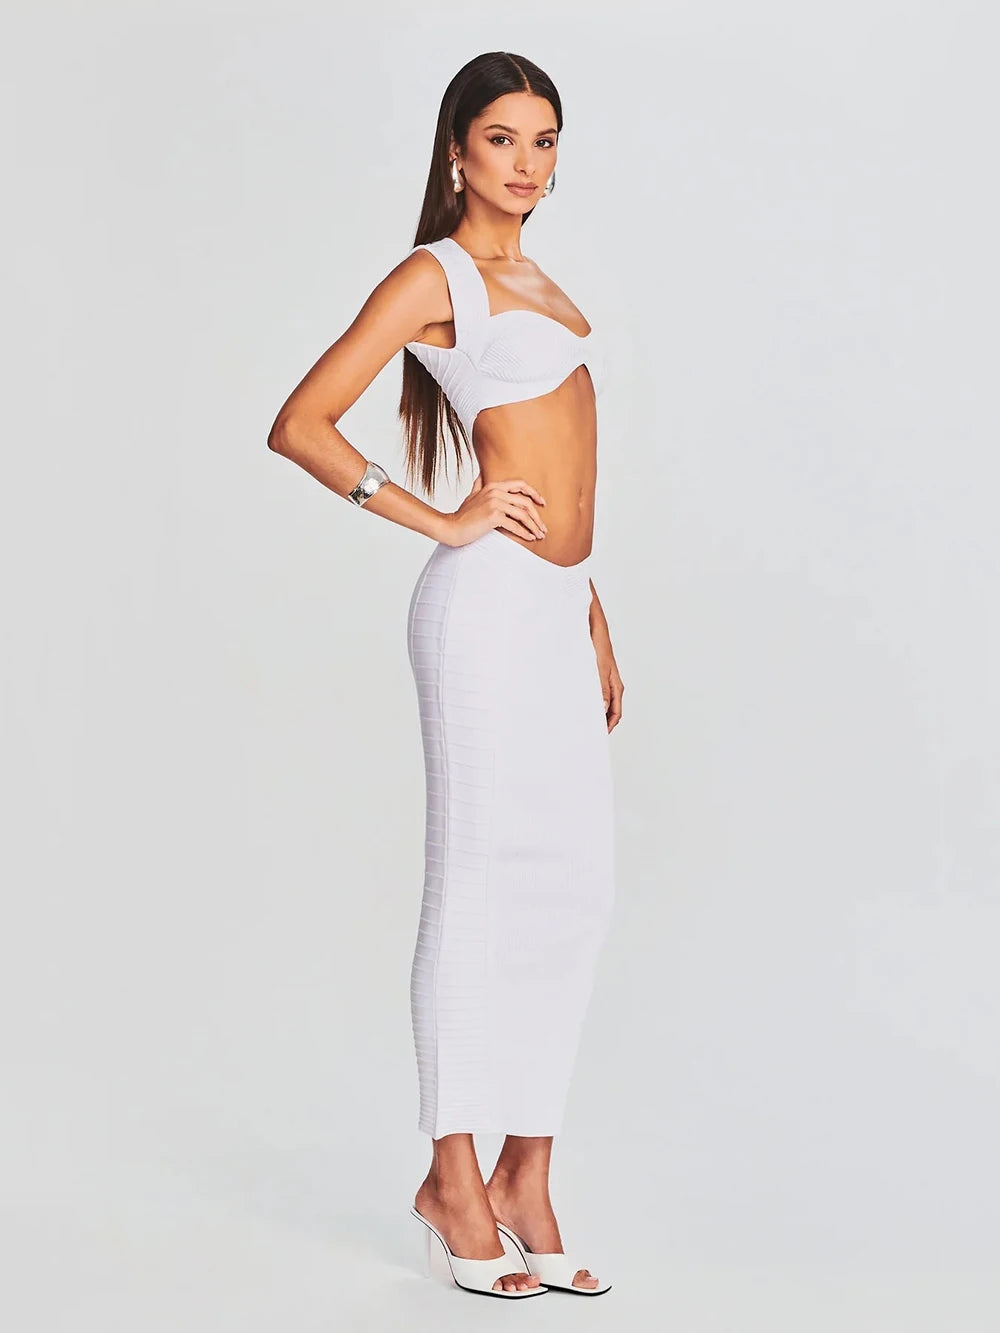 Square Collar Cut Out White Mid-Calf Bandage Dress